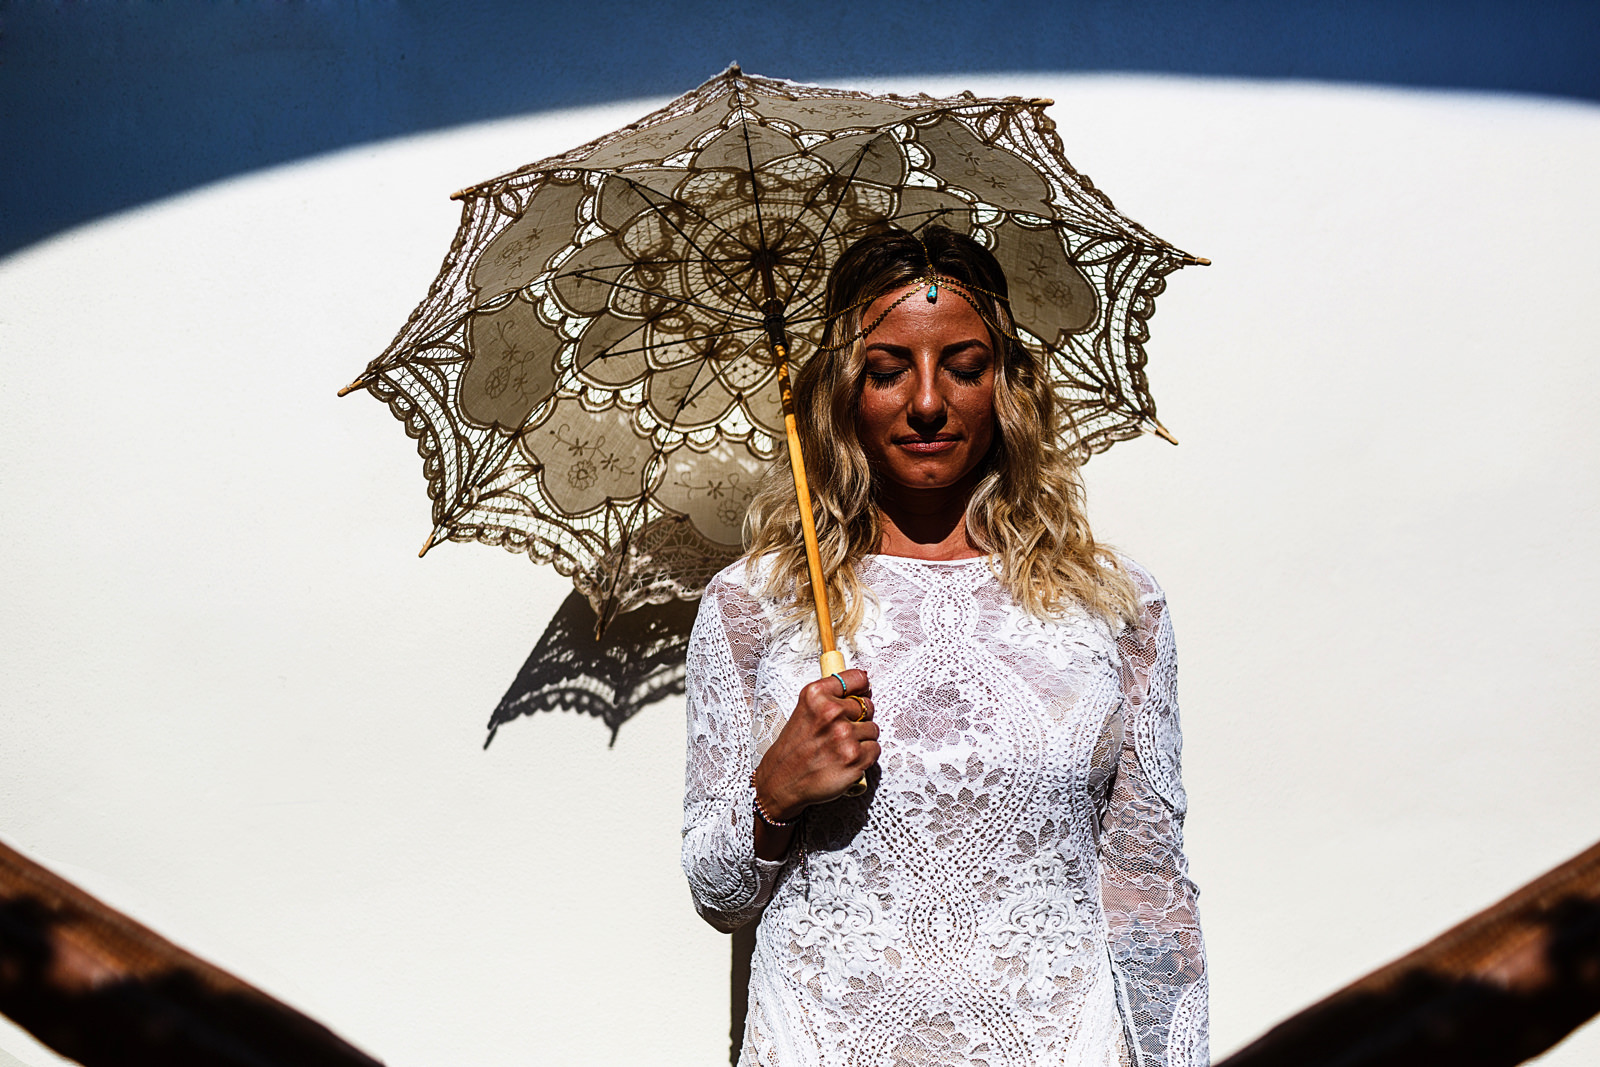 Bride portrait holding a knitted umbrella under a blue arch shadow